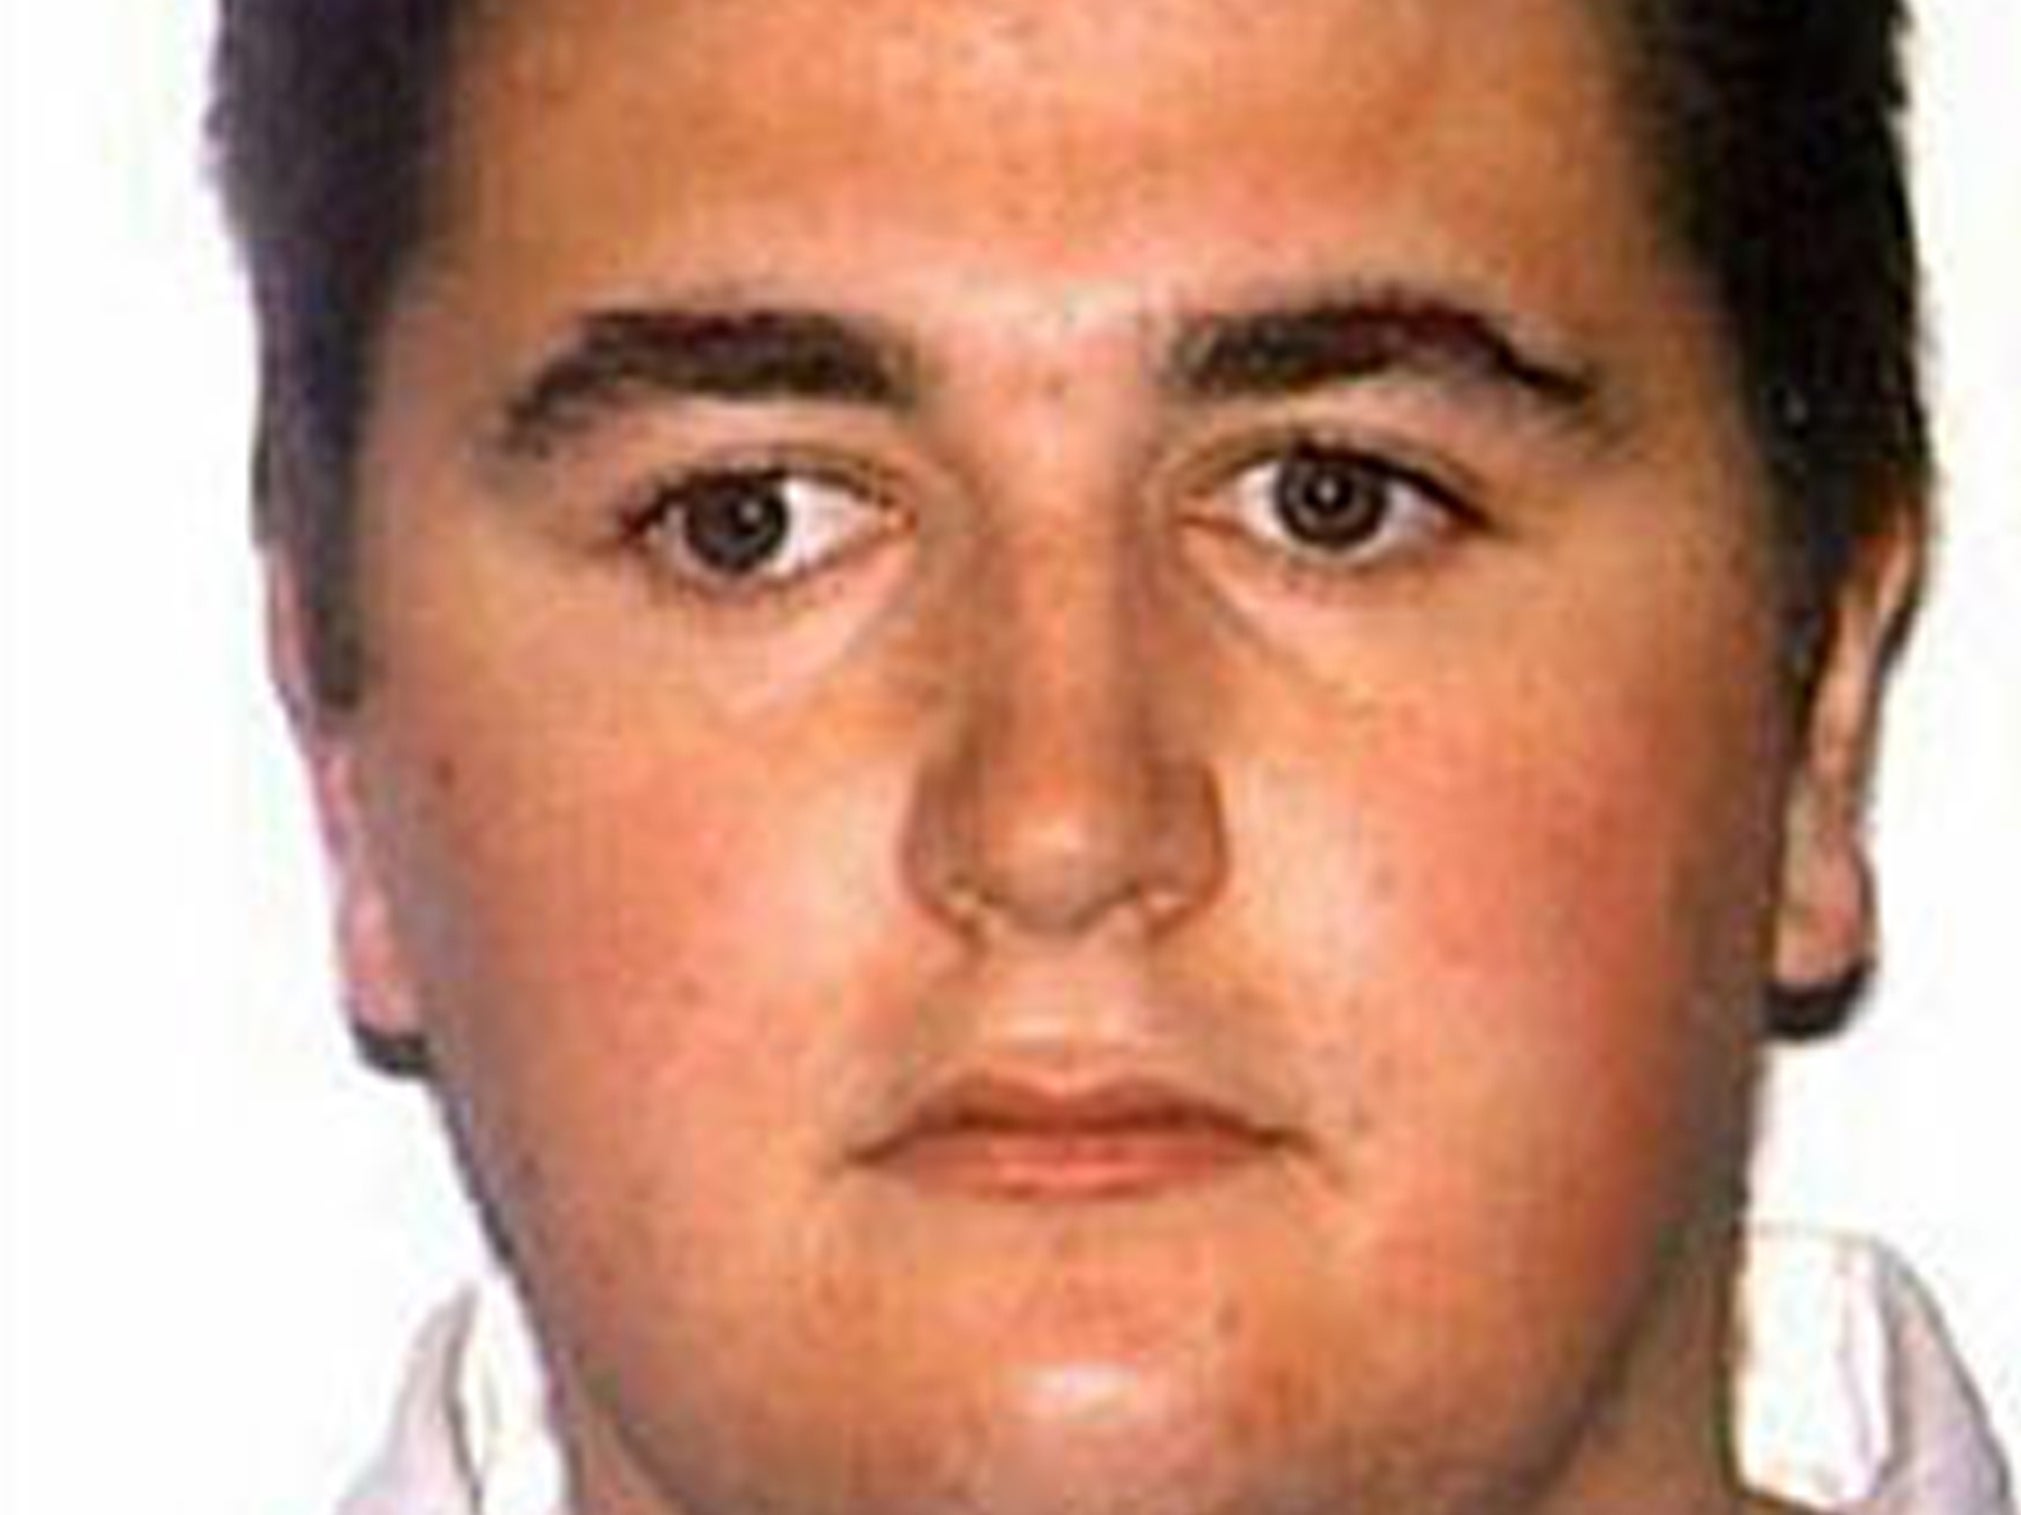 Nicky Reilly, who had Asperger's and learning difficulties, admitted attempted murder and preparing an act of terrorism